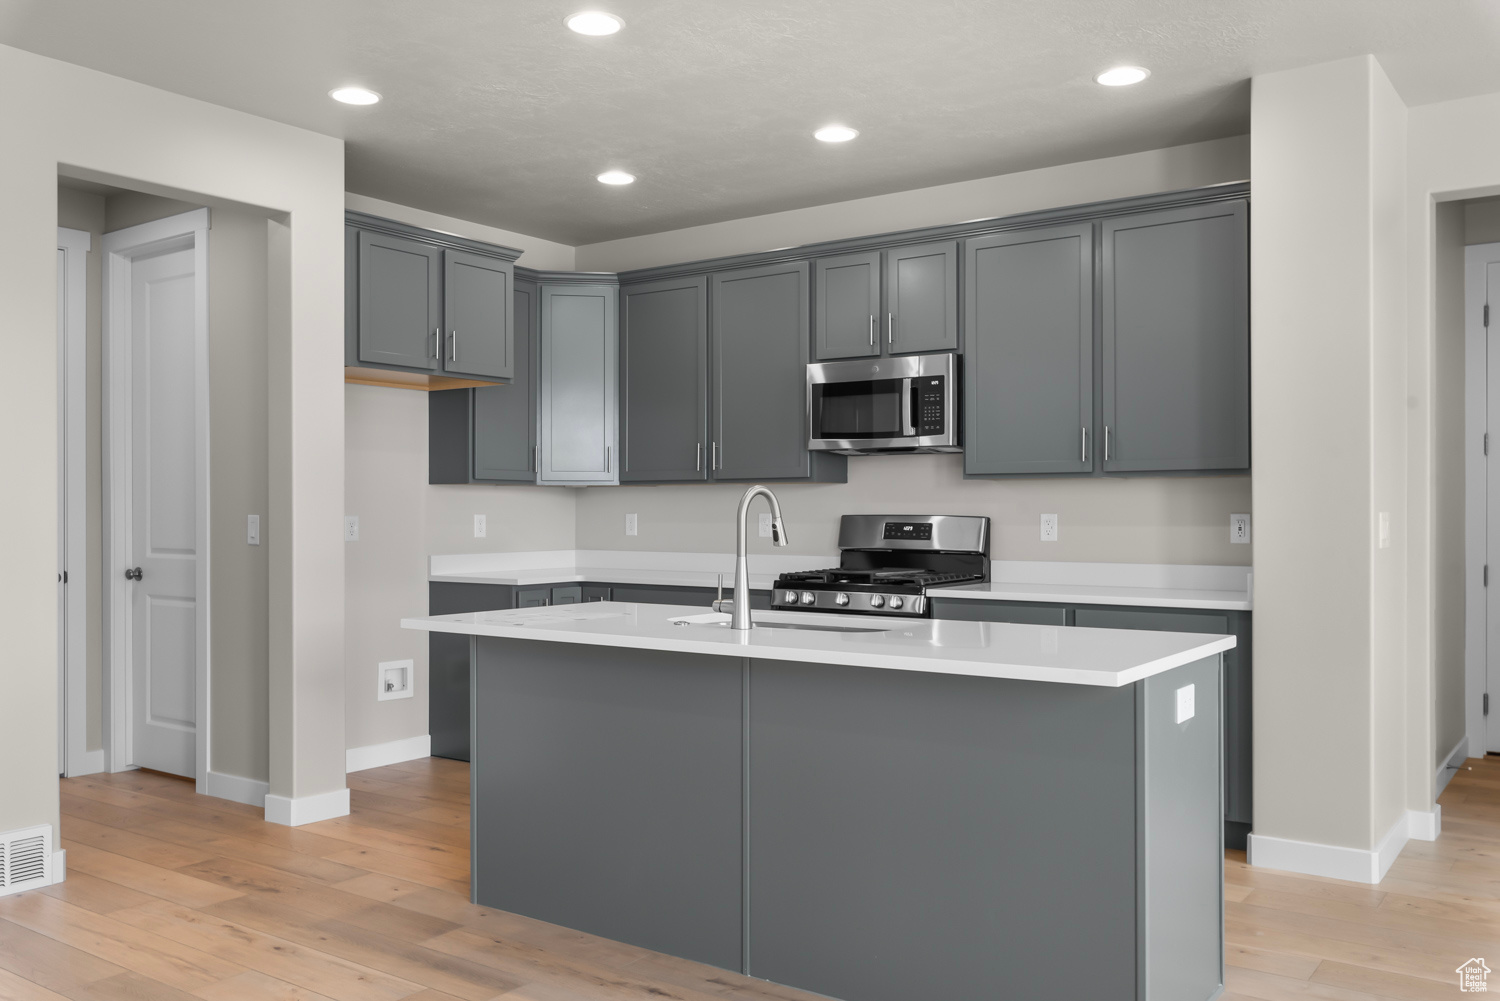 Kitchen with a kitchen island with sink, light wood-type flooring, gray cabinets, appliances with stainless steel finishes, and sink